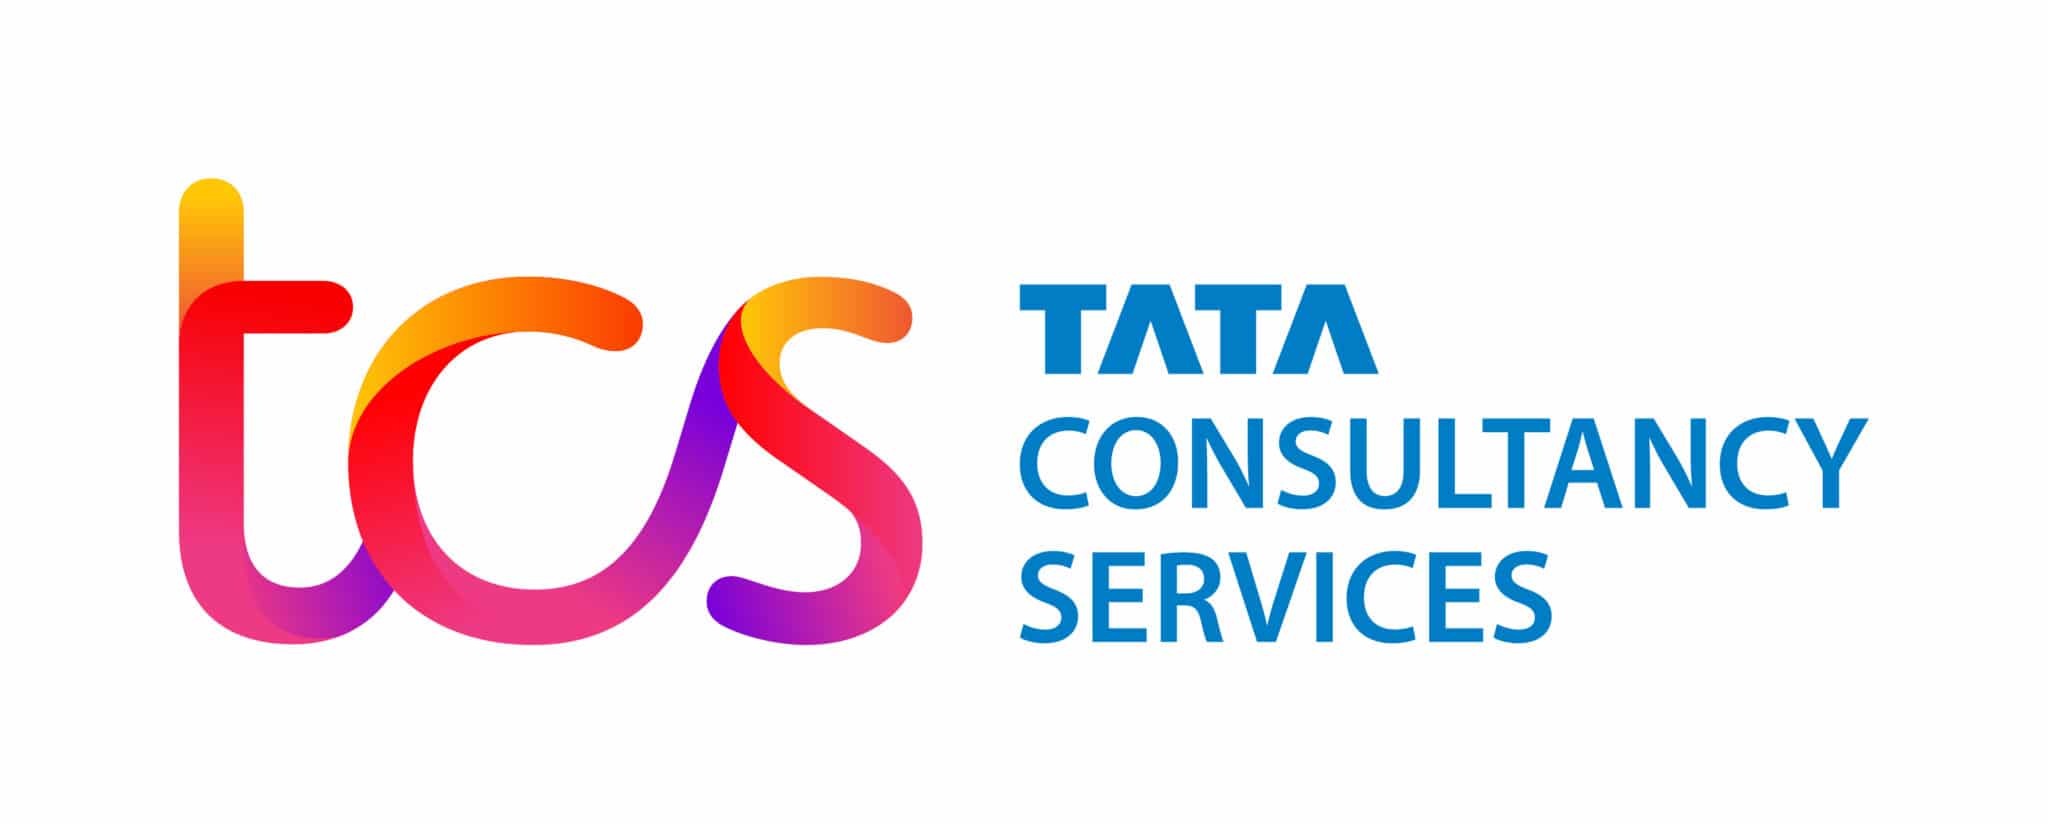 Tata-and-TCS-Marks-Stacked-CMYK